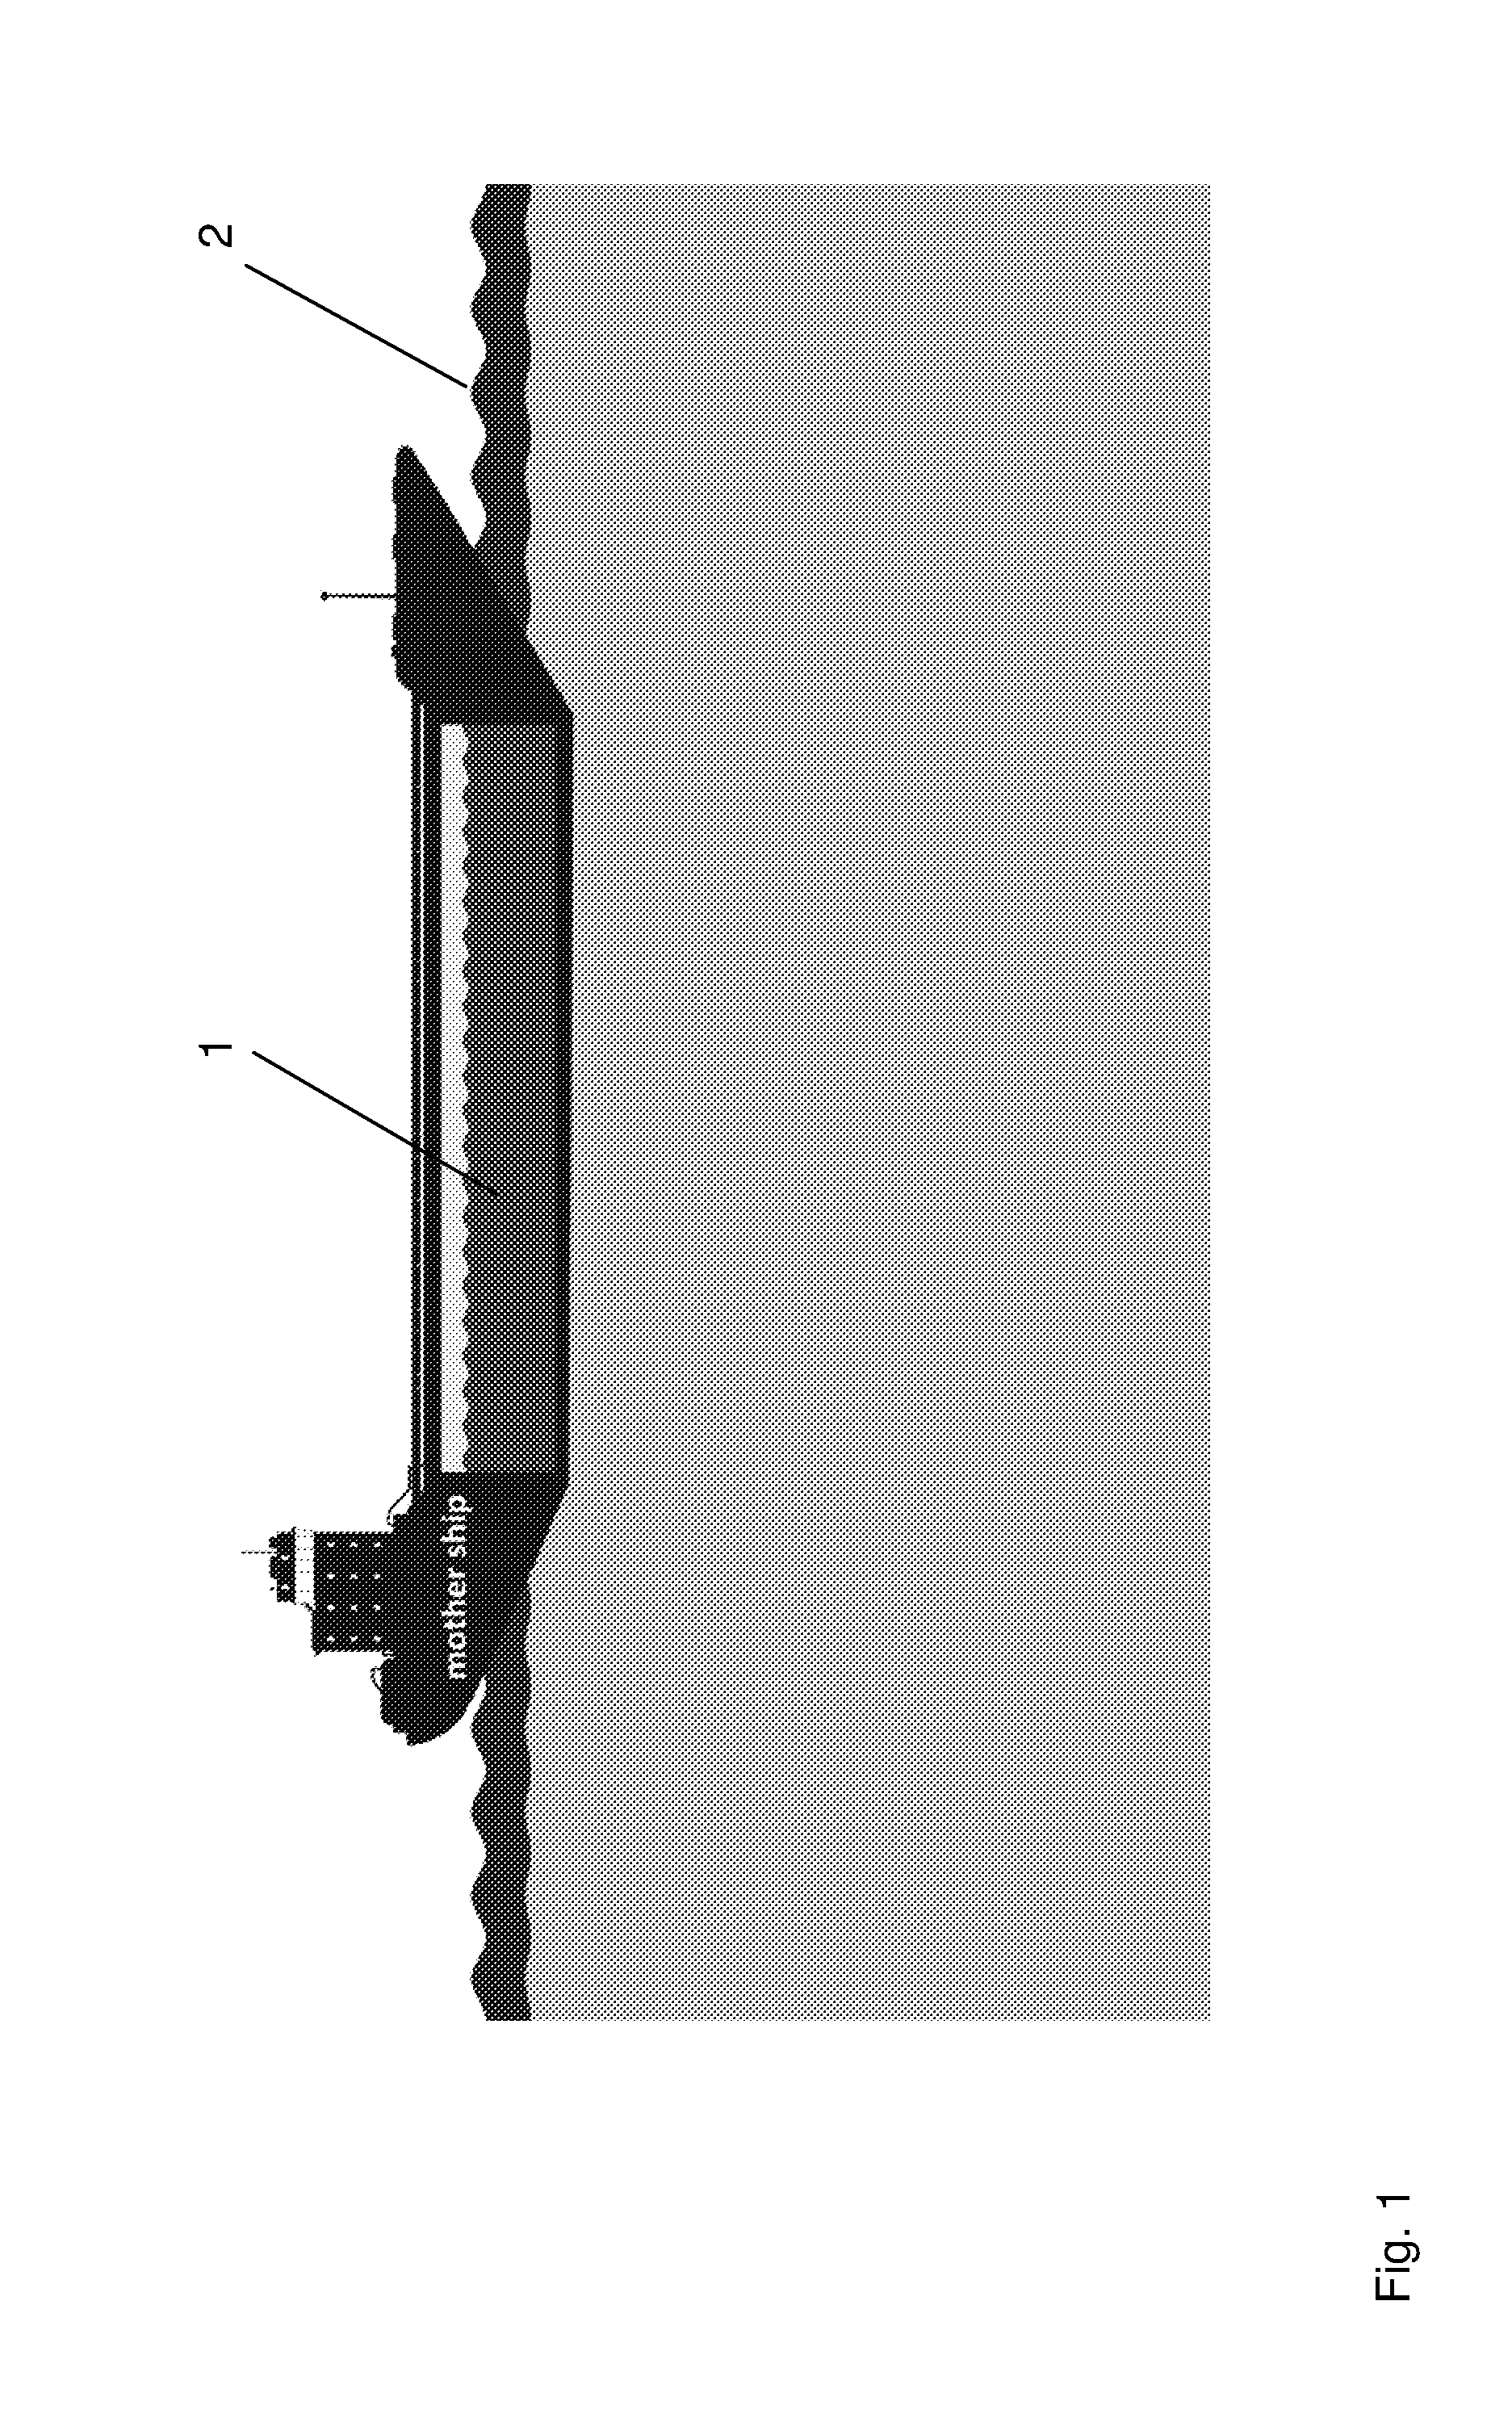 Composition for triggering microbiological processes in water and method of producing the same